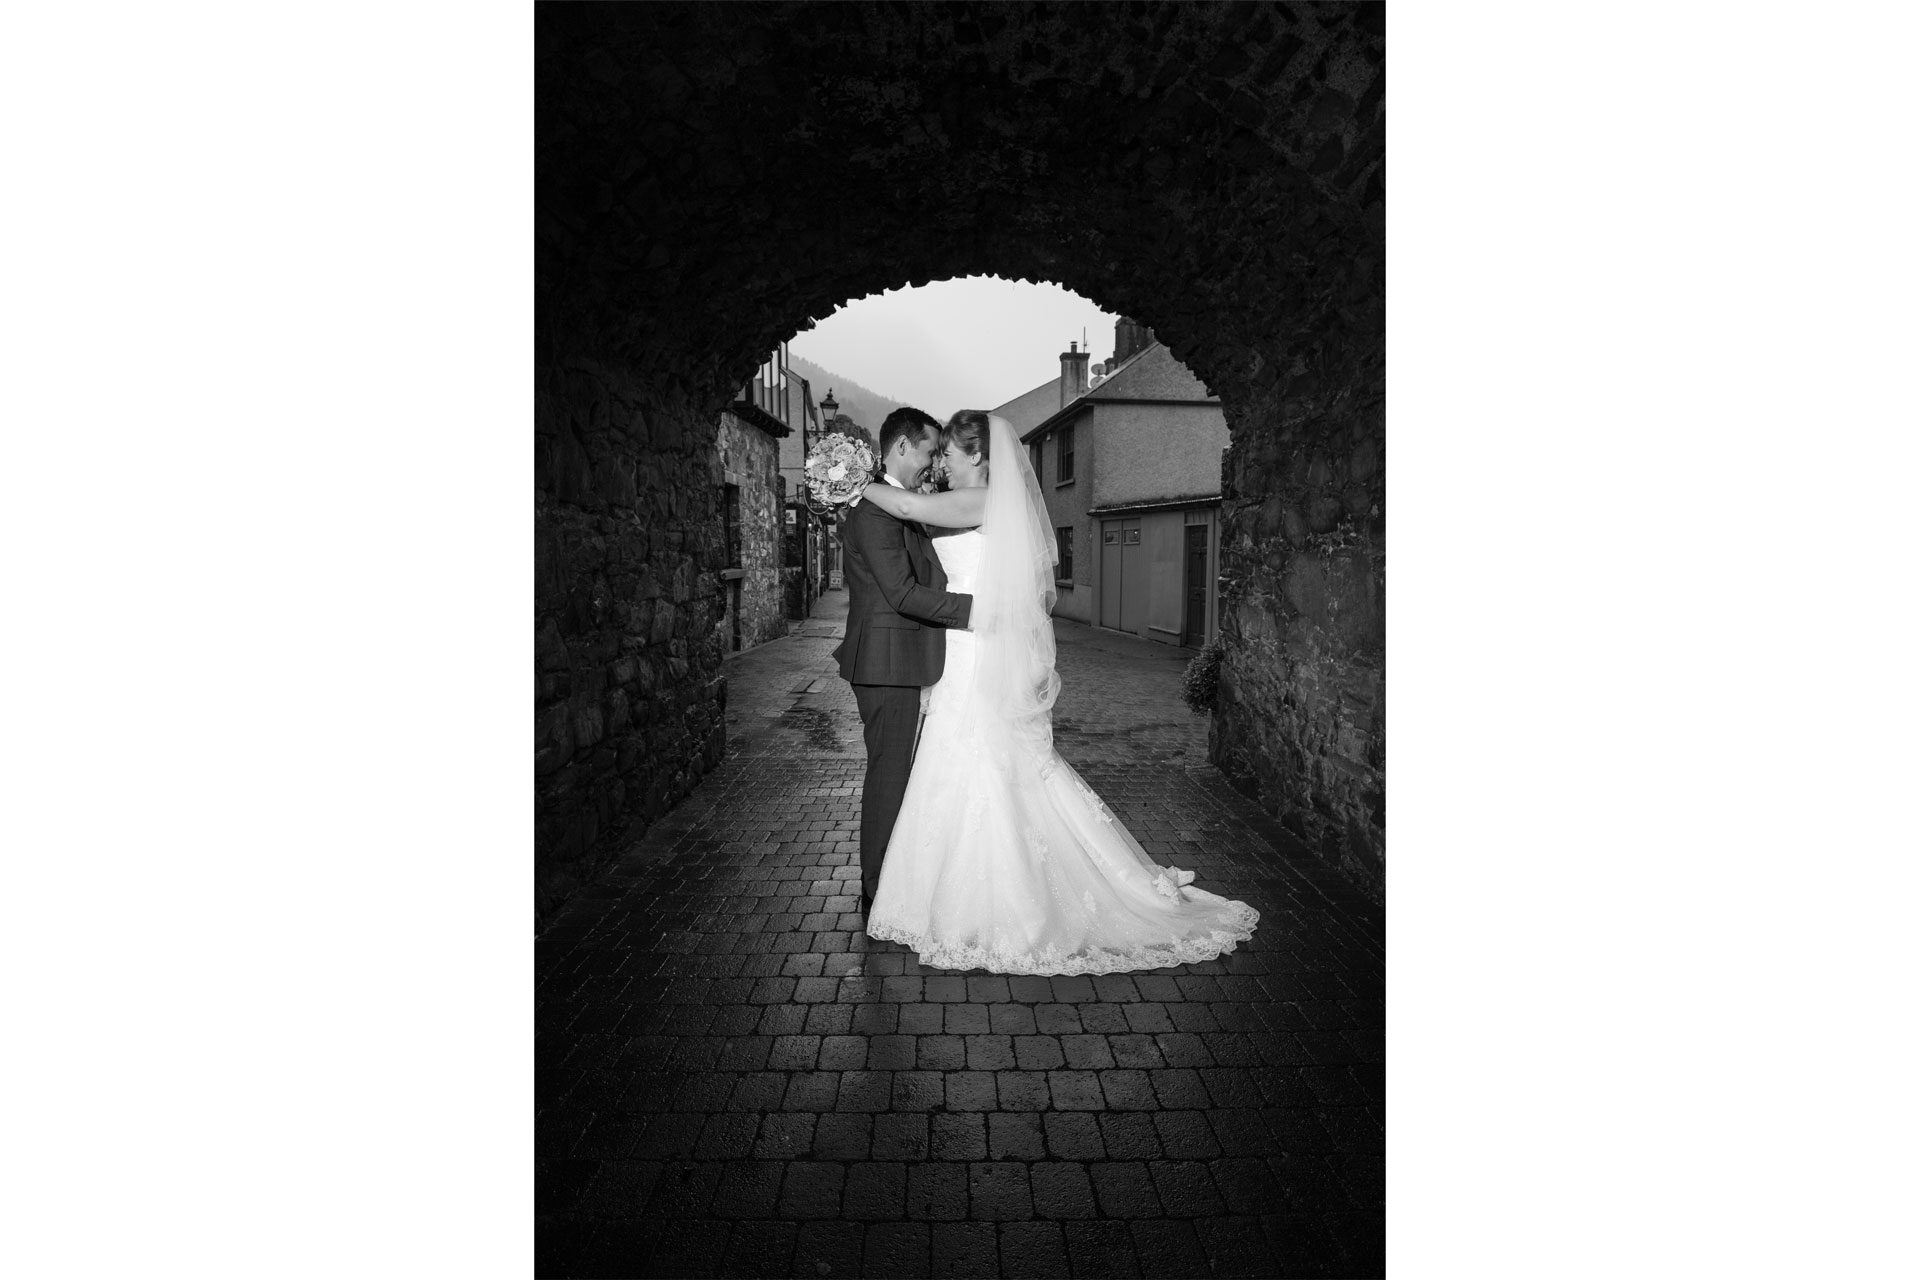 Picture of Ruth and Robert at Carlingford on their wedding day captured by Fermanagh, Tyrone and Northern Ireland Wedding Photographer, Trevor Lucy Photography